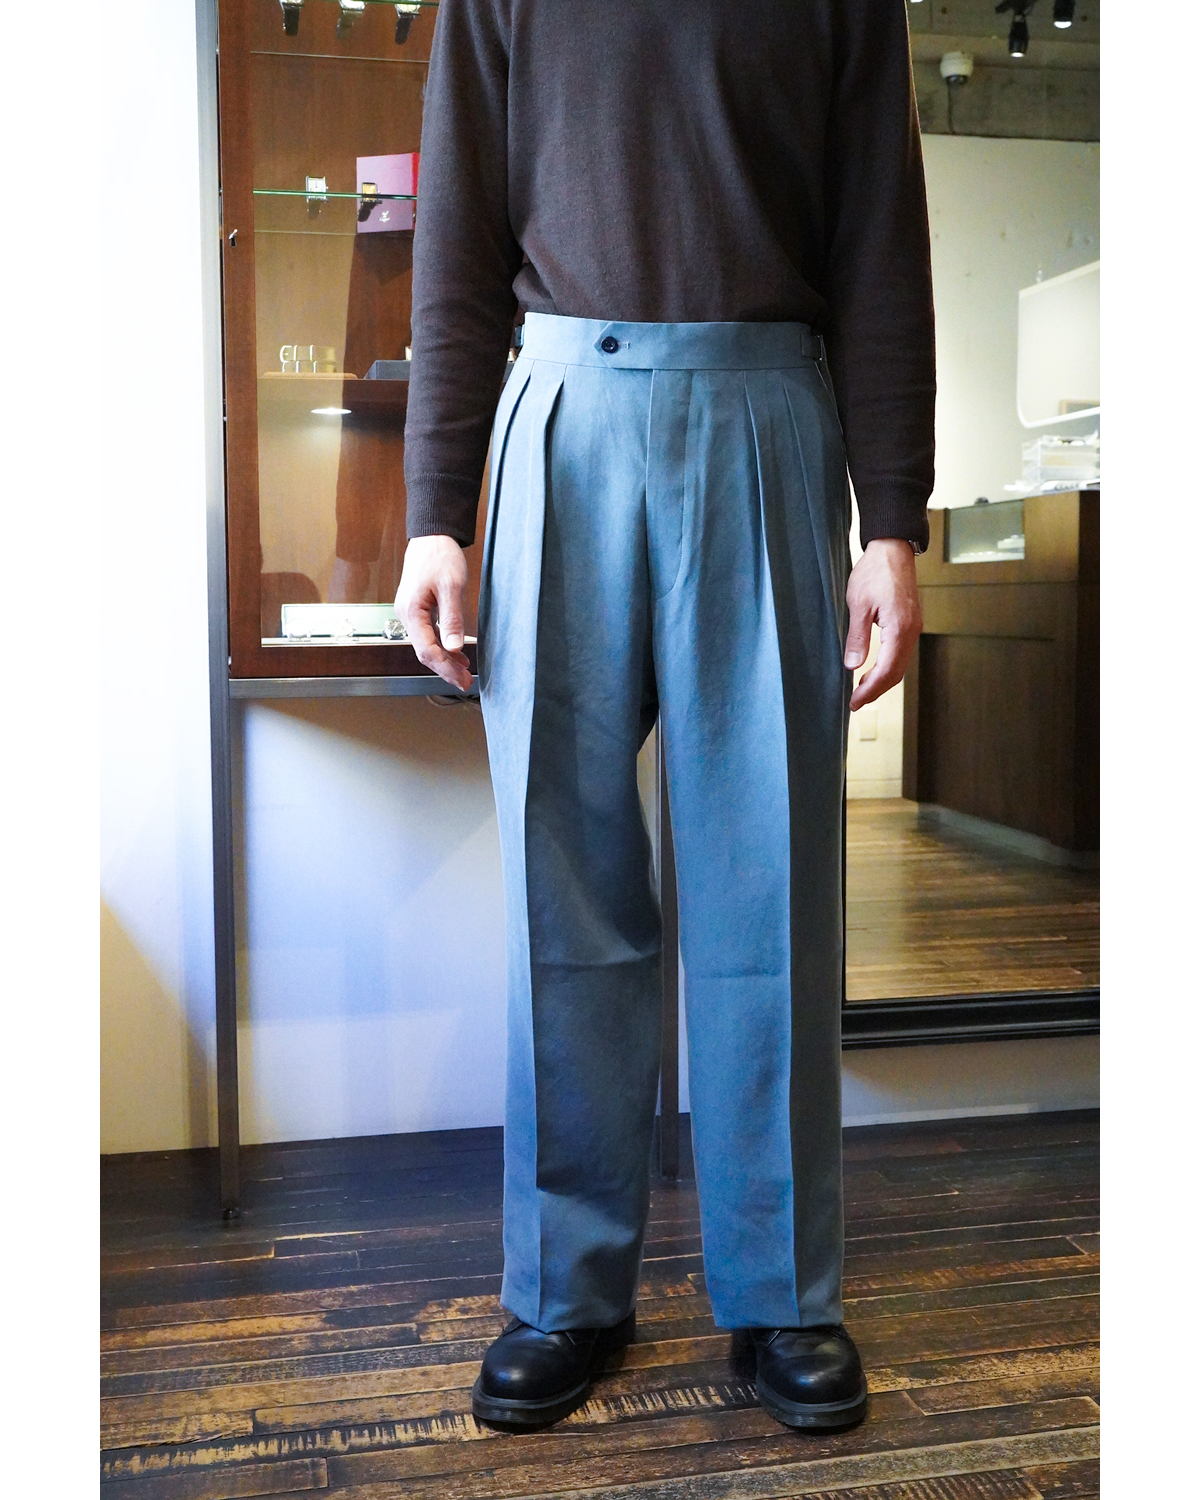 NEAT｜CELLULOSE NIDOM｜WIDE TYPE Ⅱ - Blue Gray｜PRODUCT 